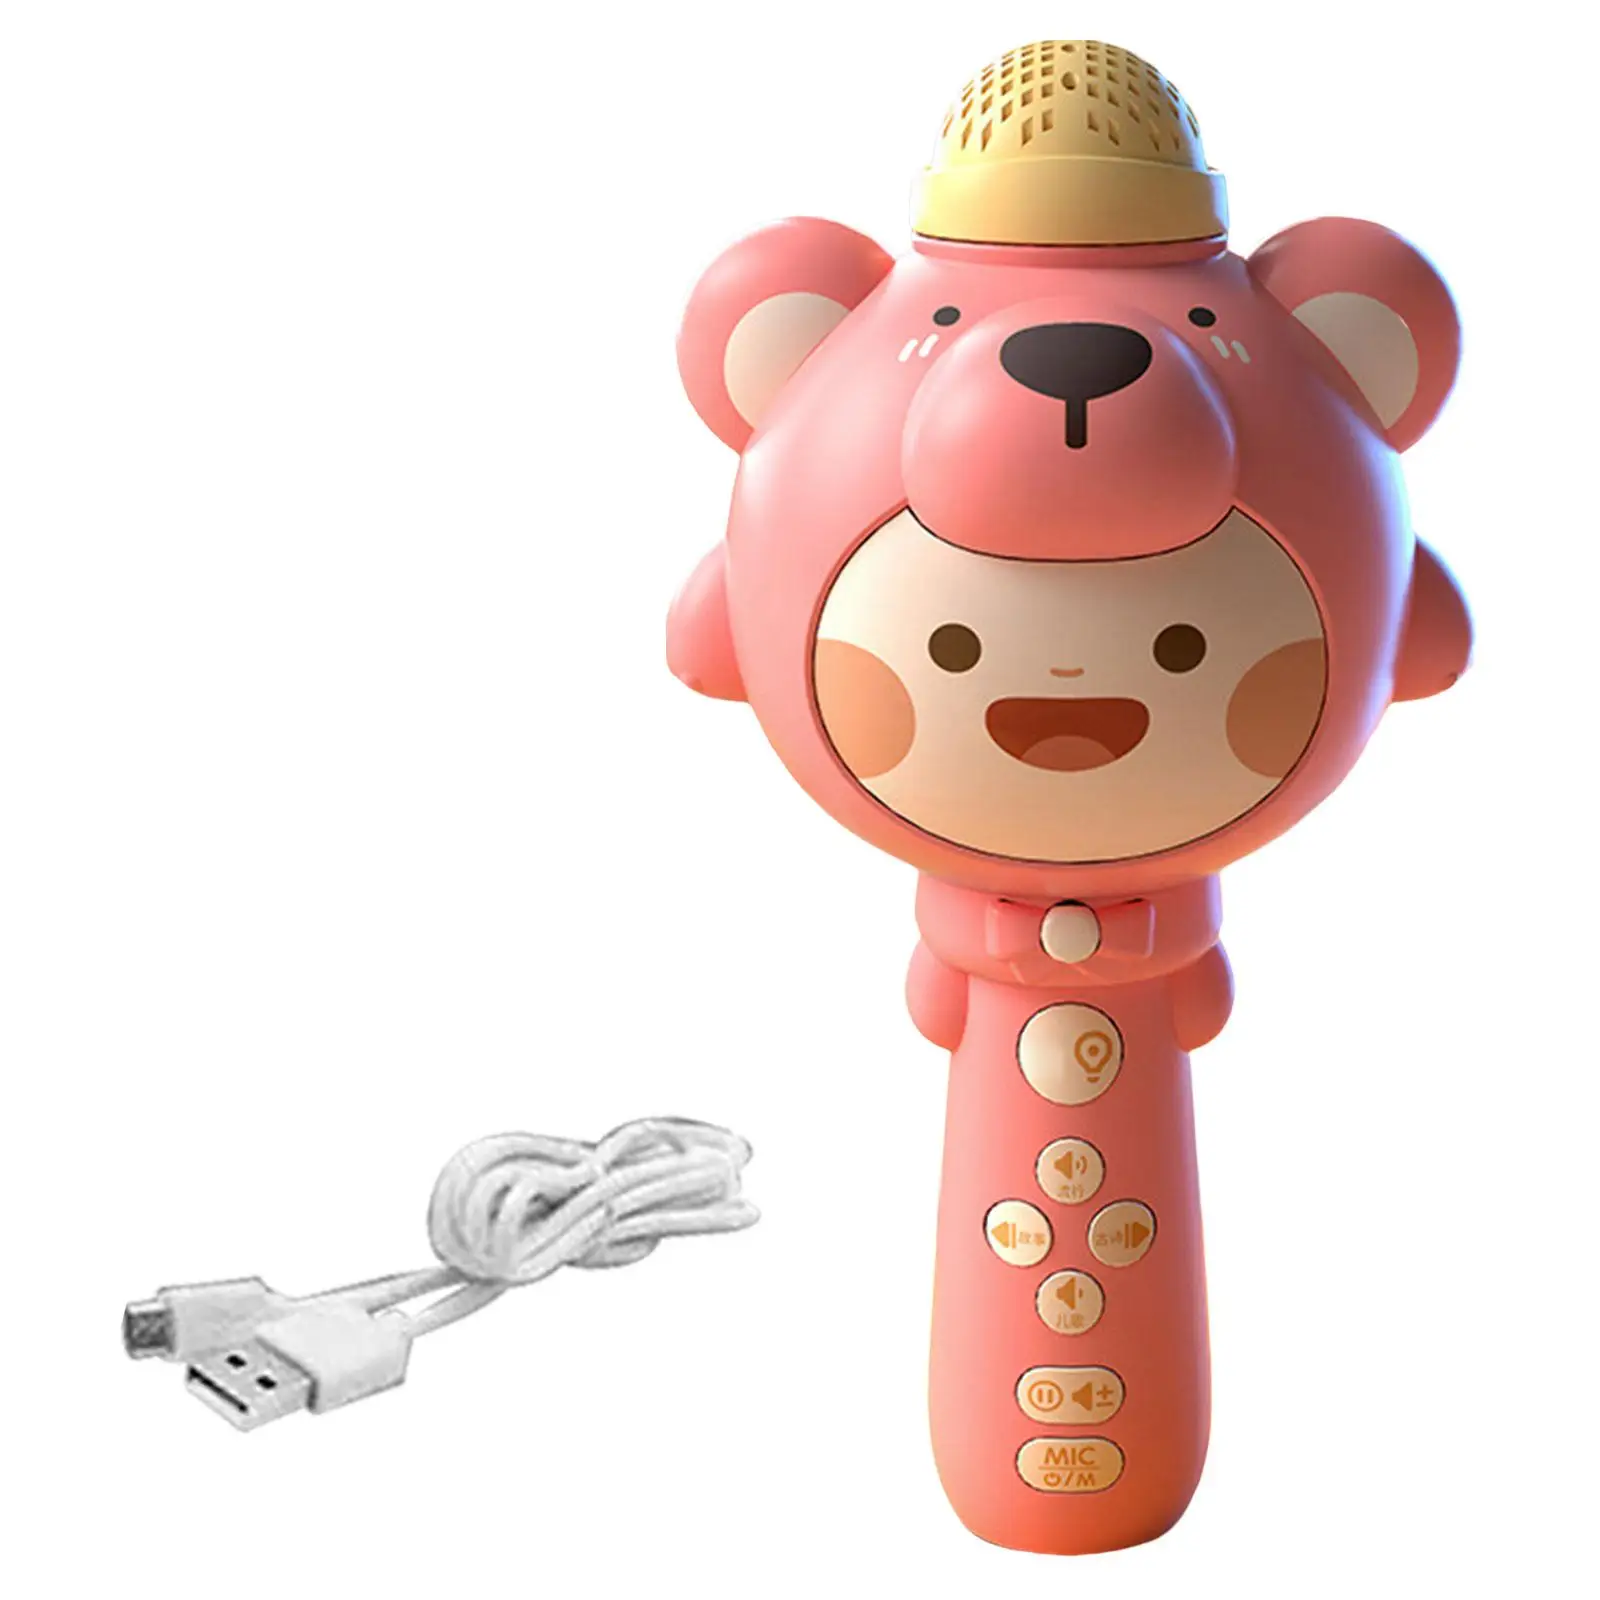 Portable Wireless Karaoke Machine with LED Lights Bluetooth Microphone for Girls Boys Toy Adults Children KTV Great Gifts